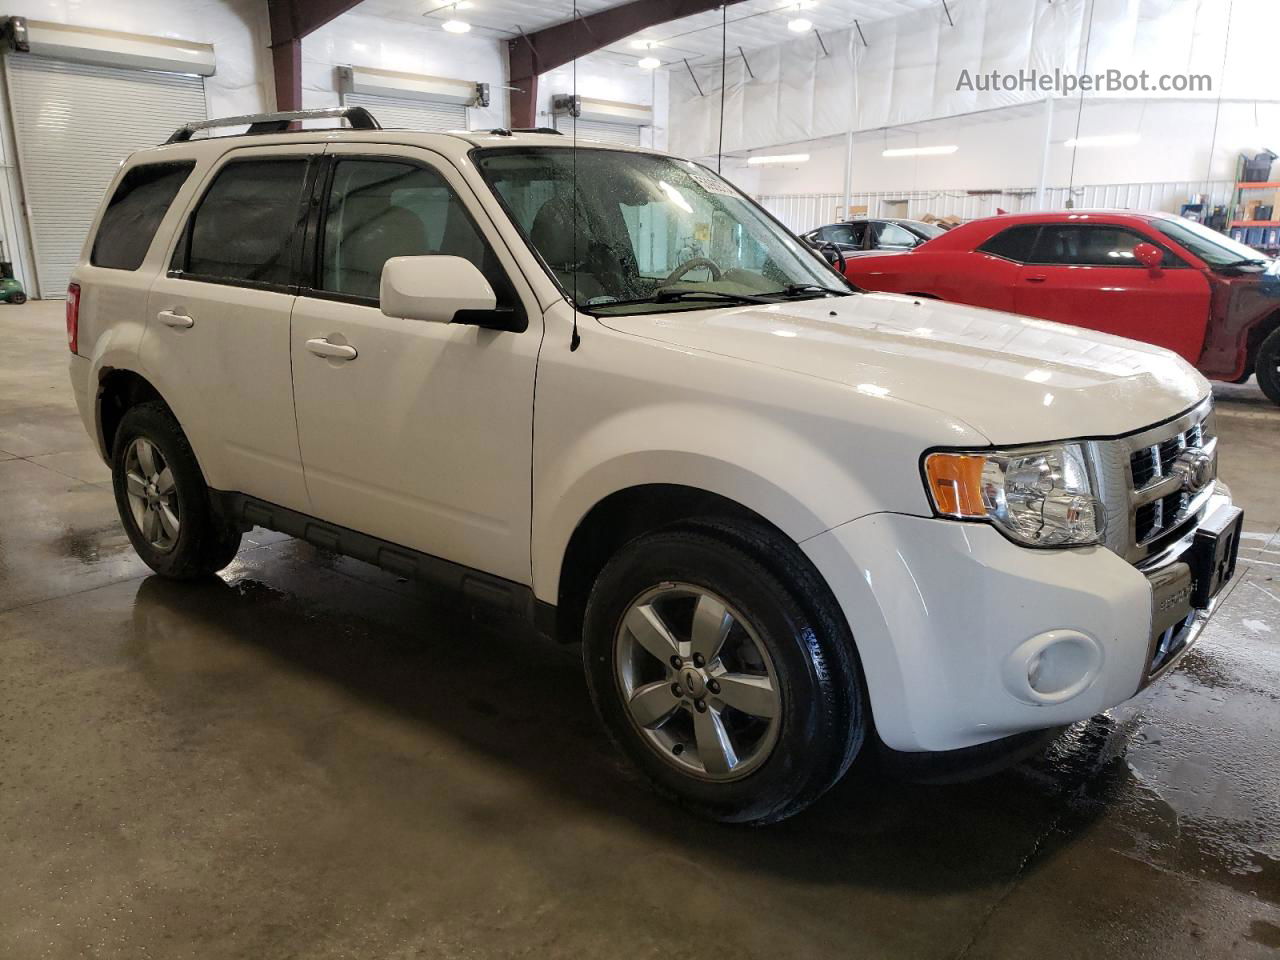 2009 Ford Escape Limited White vin: 1FMCU94G69KC05350